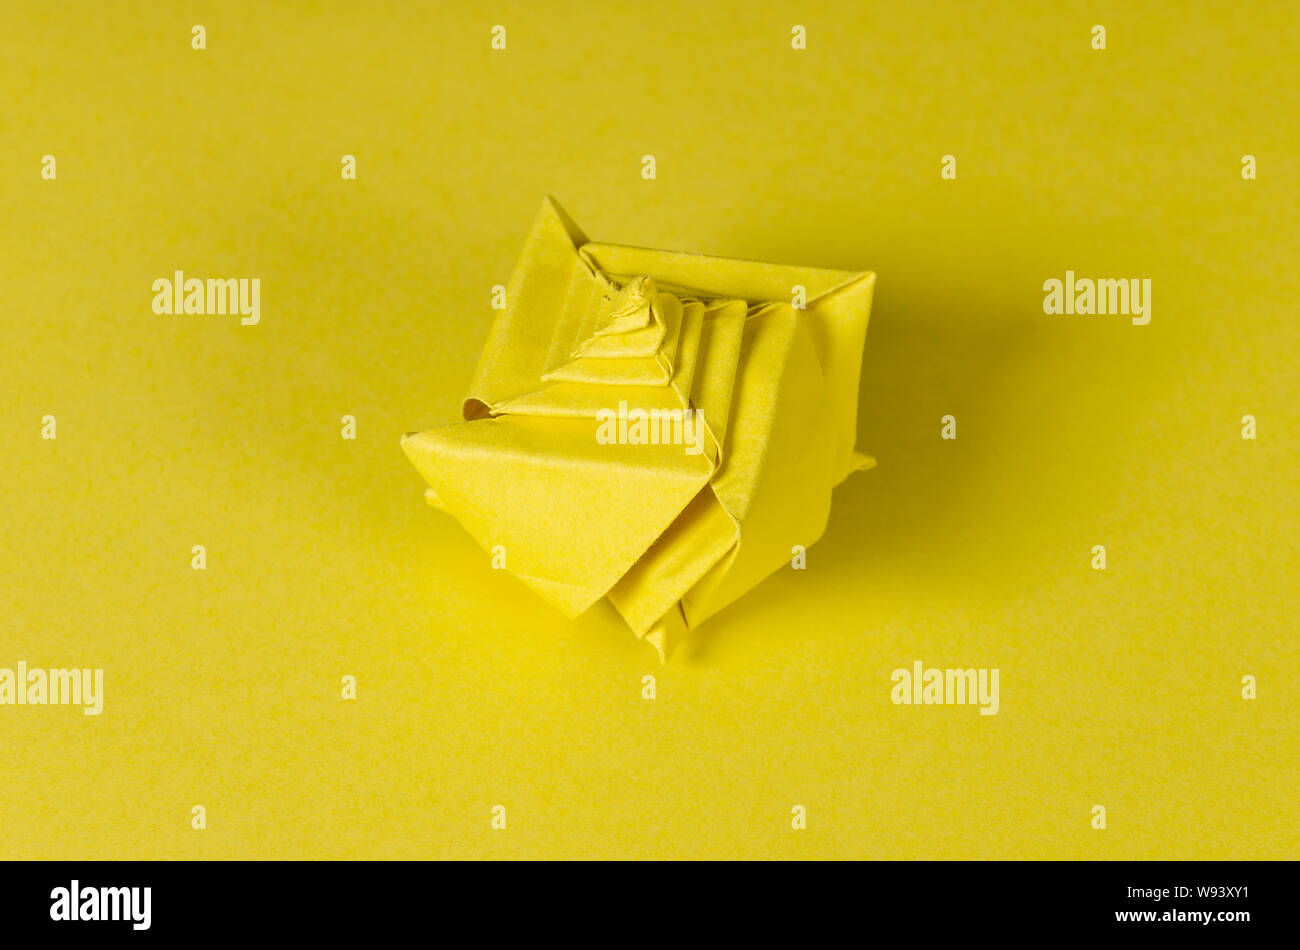 Yellow origami seashell on yellow background. Japanese art of paper folding. Flat square sheet of paper transferred into a finished sculpture. Stock Photo